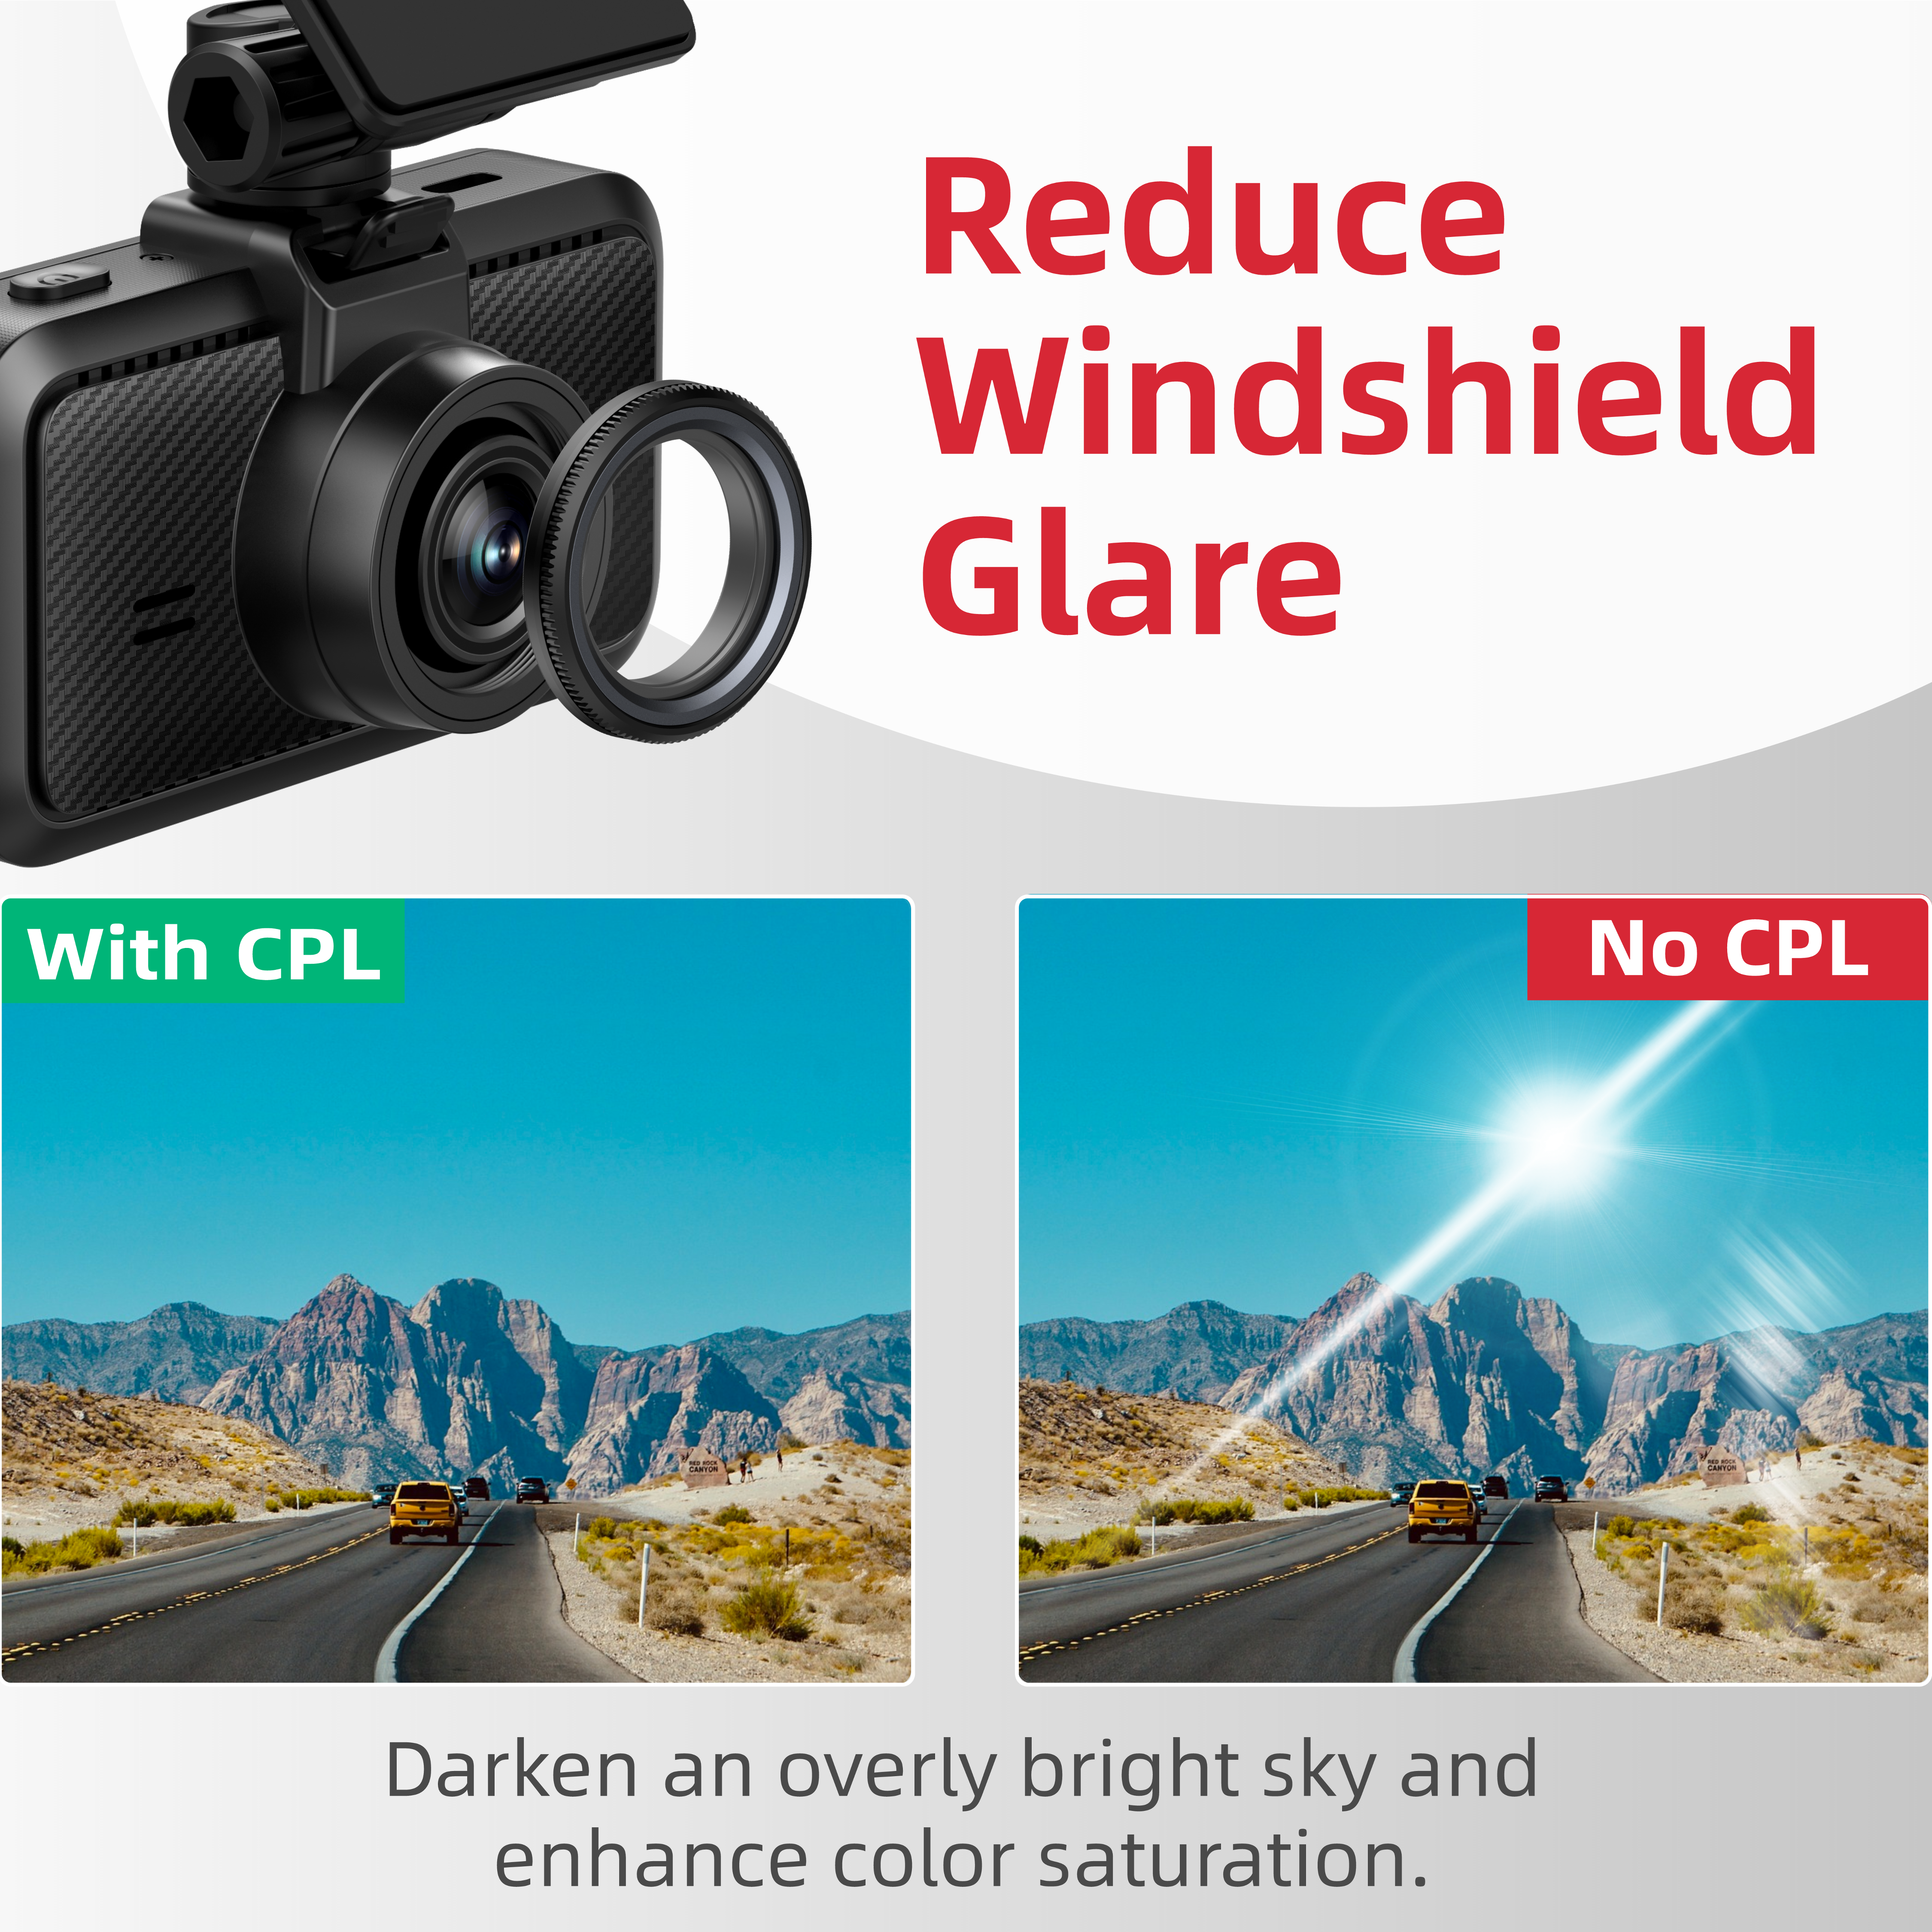 Miofive Dash Cam CPL Filter, 34MM Anti-Glare Circular Polarizer Lens for Miofive S1 Series Dashcam, Reduce Glare and Reflection, Enhance Color and Contrast